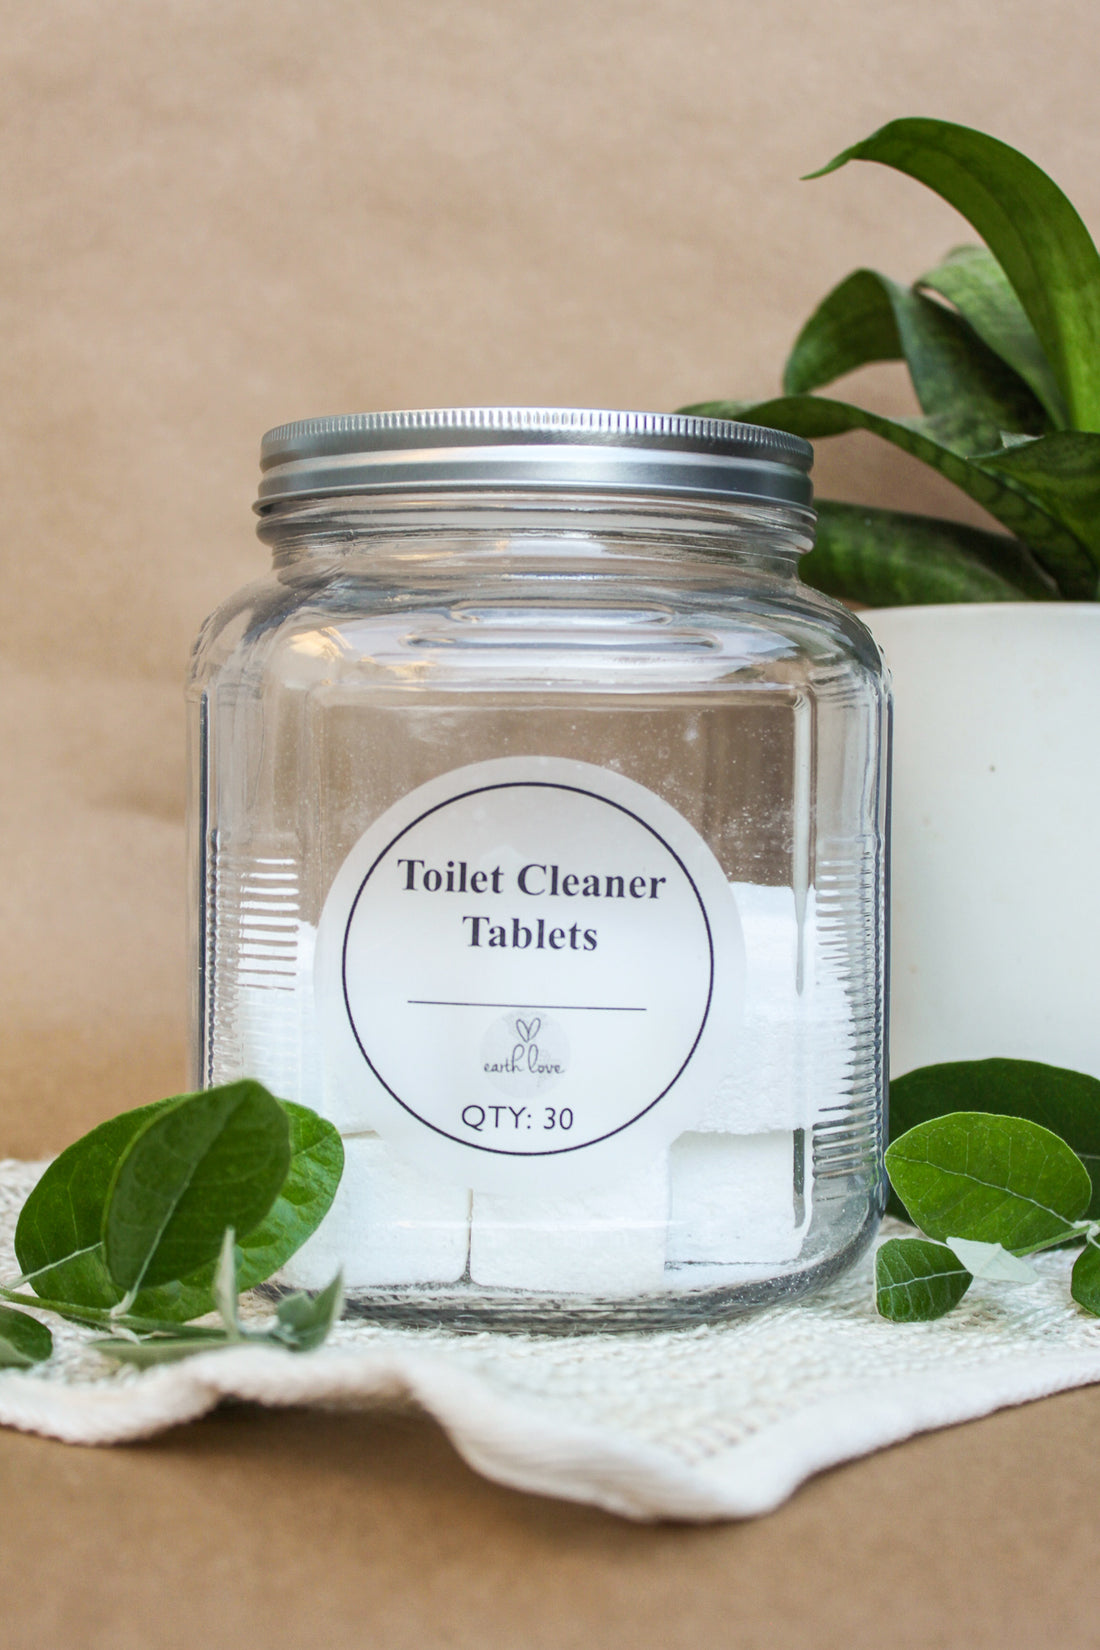 Toilet Cleaner Tablets